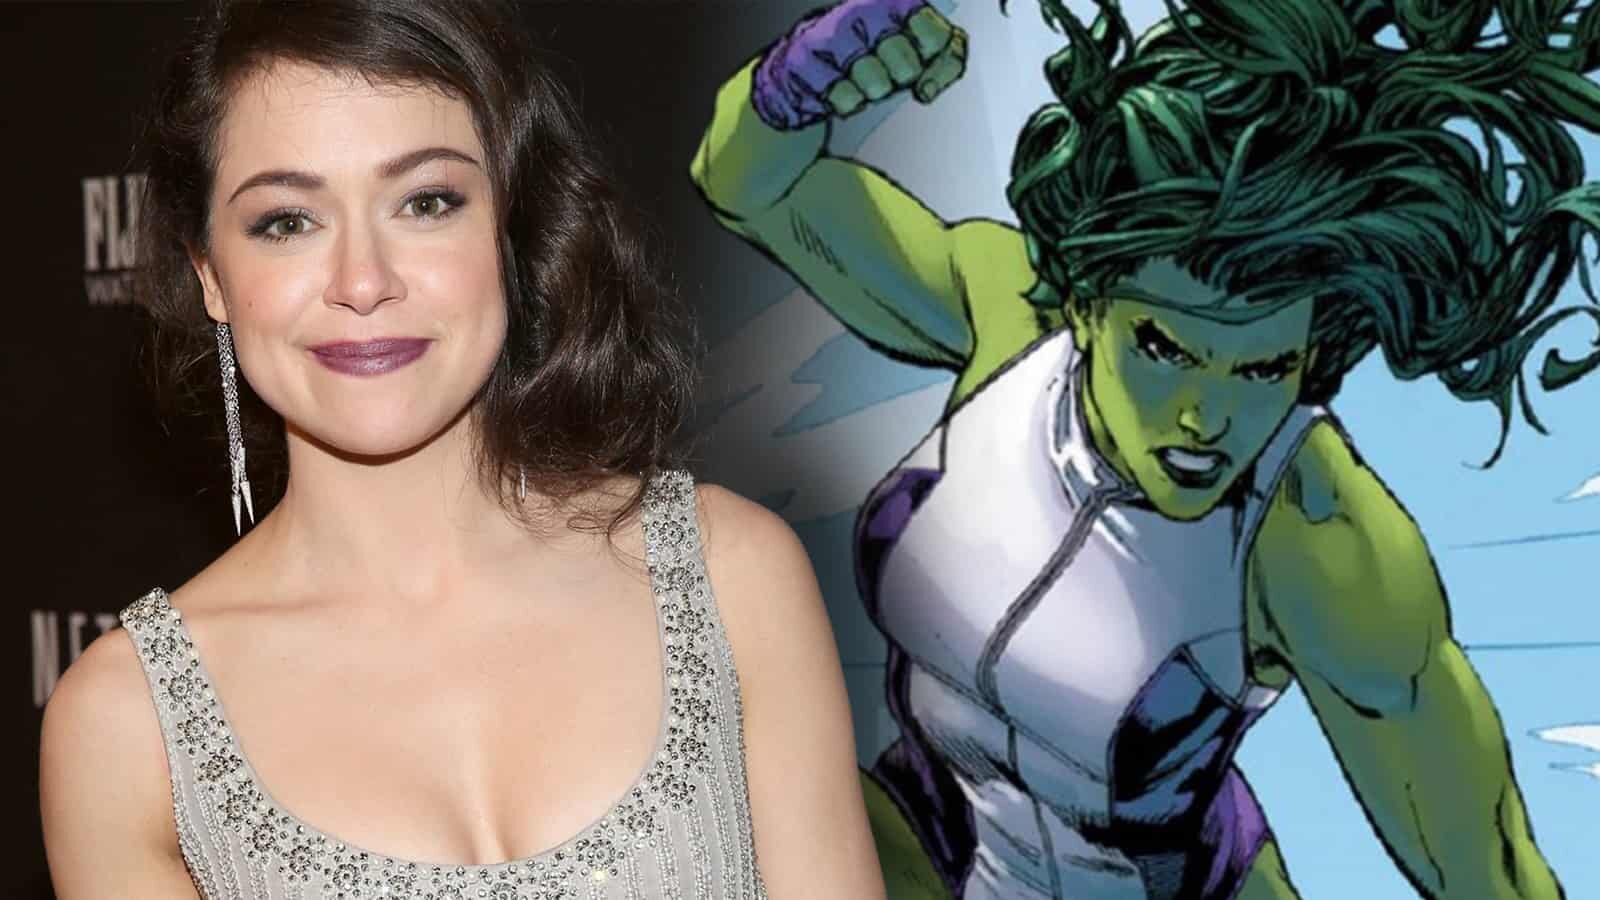 Tatiana Maslany in a grey top superimposed next to a comic book illustration of She-Hulk dropping down with a fist in the air.